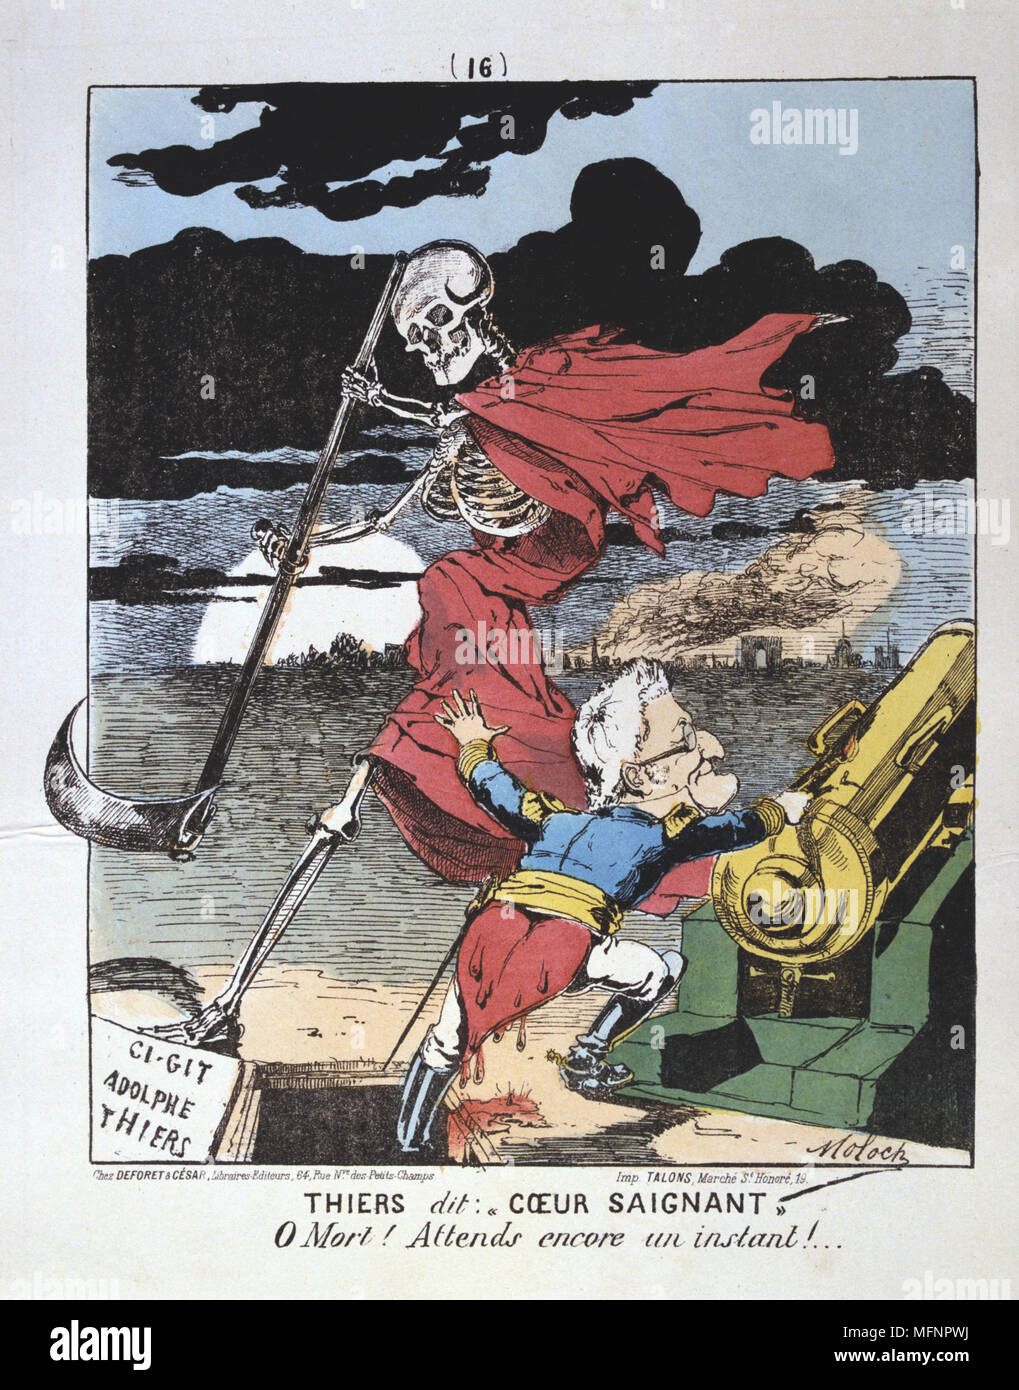 Paris Commune 26 March-28 May 1871. Louis Adolphe Thiers (1797-1877) French politician, one foot in his grave, asking Death to spare him until he has defeated the Commune.  Cartoon by Moloch (1849-1909). France Politician Revolution Stock Photo